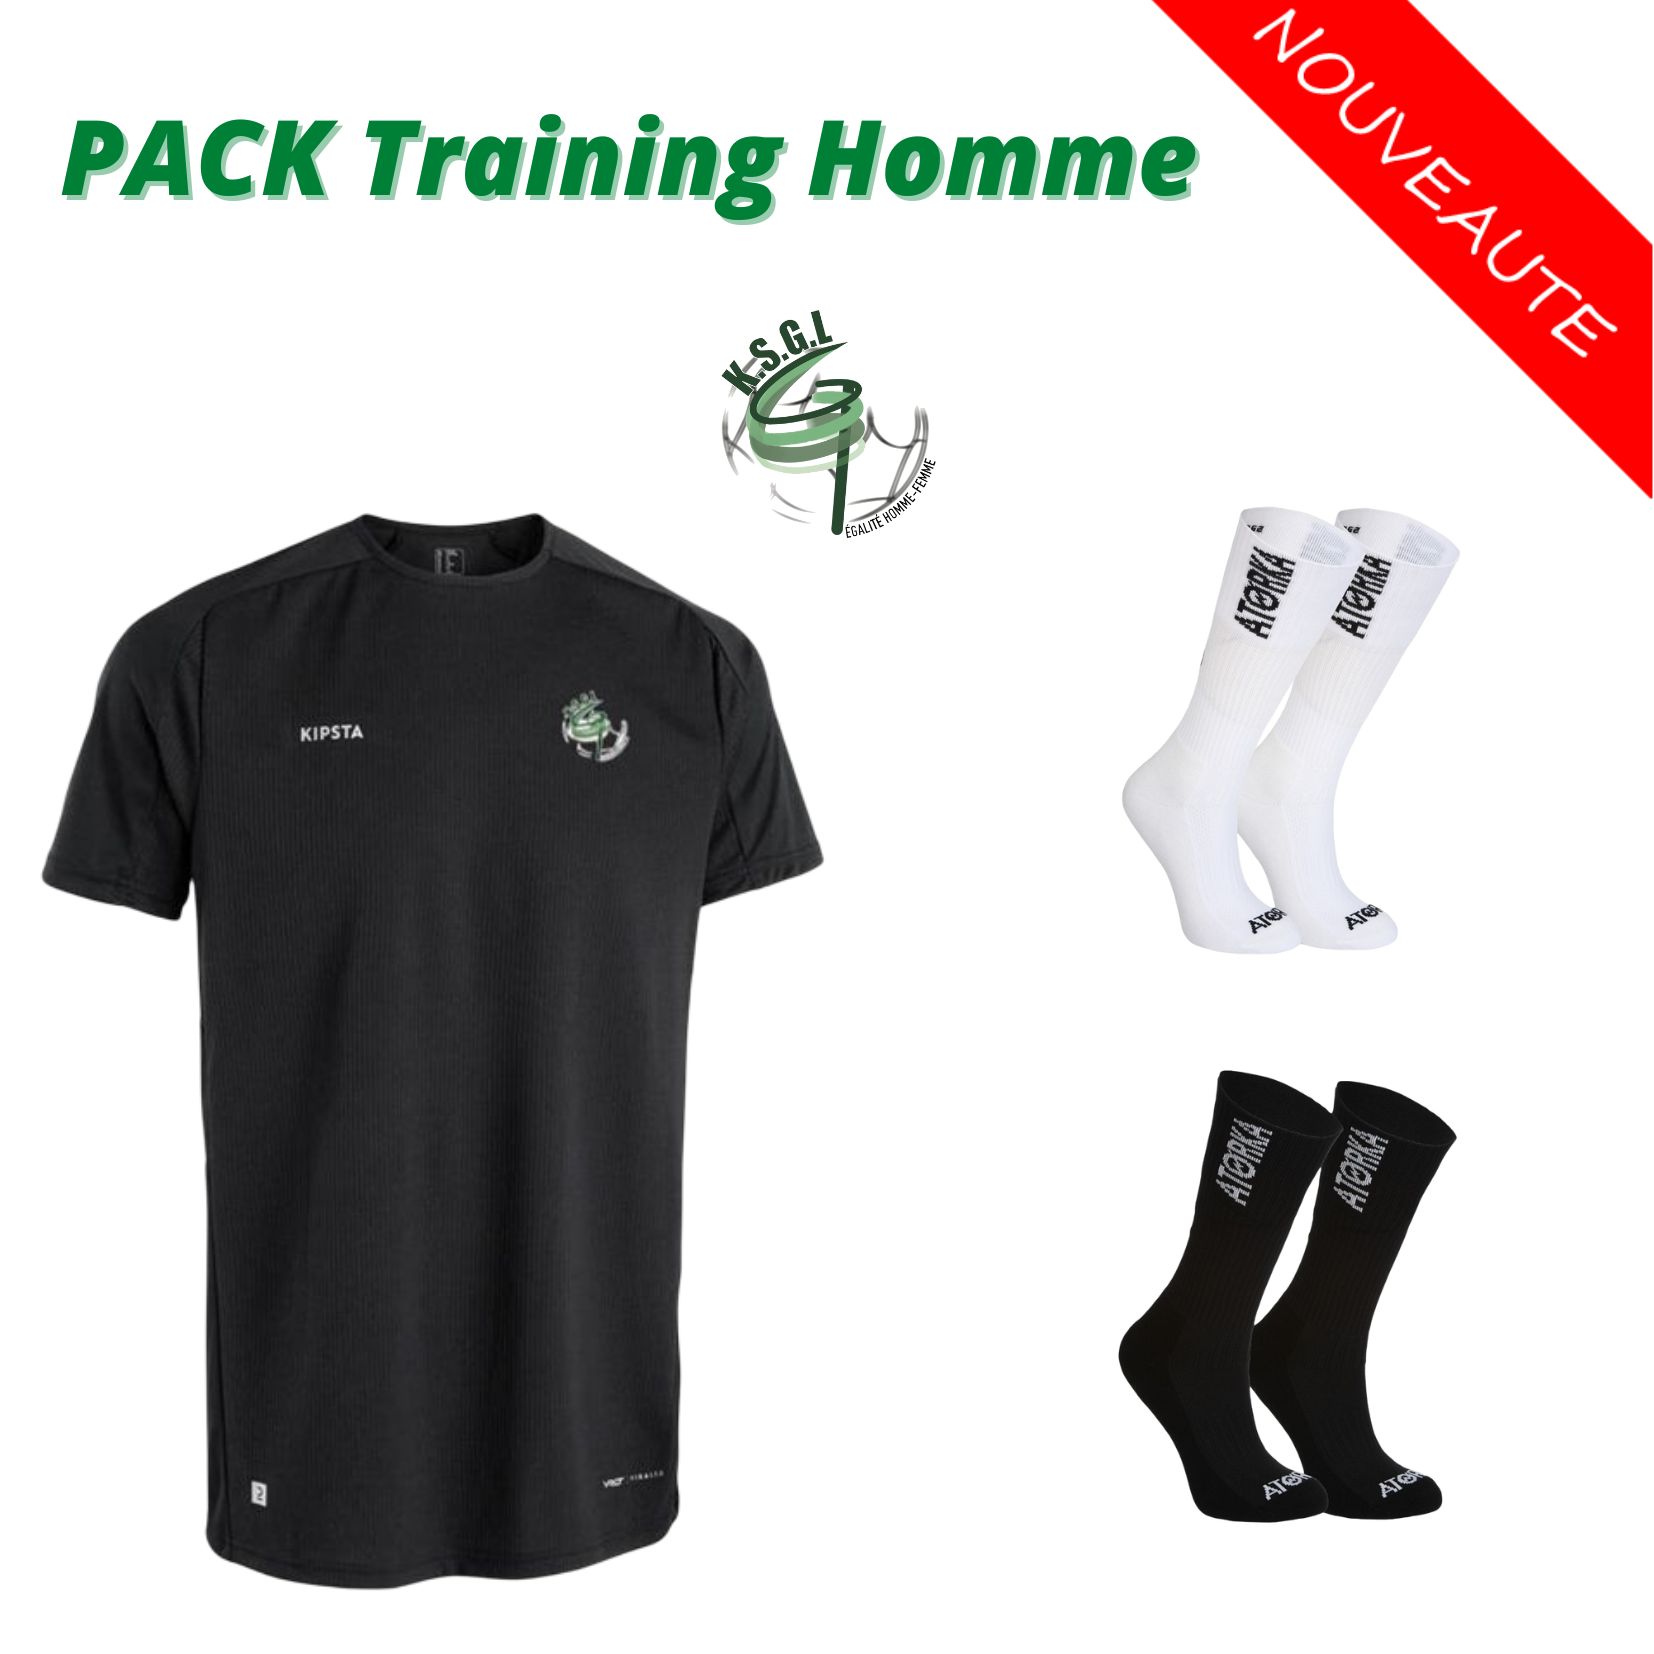 Pack Training Homme / 22,50 €